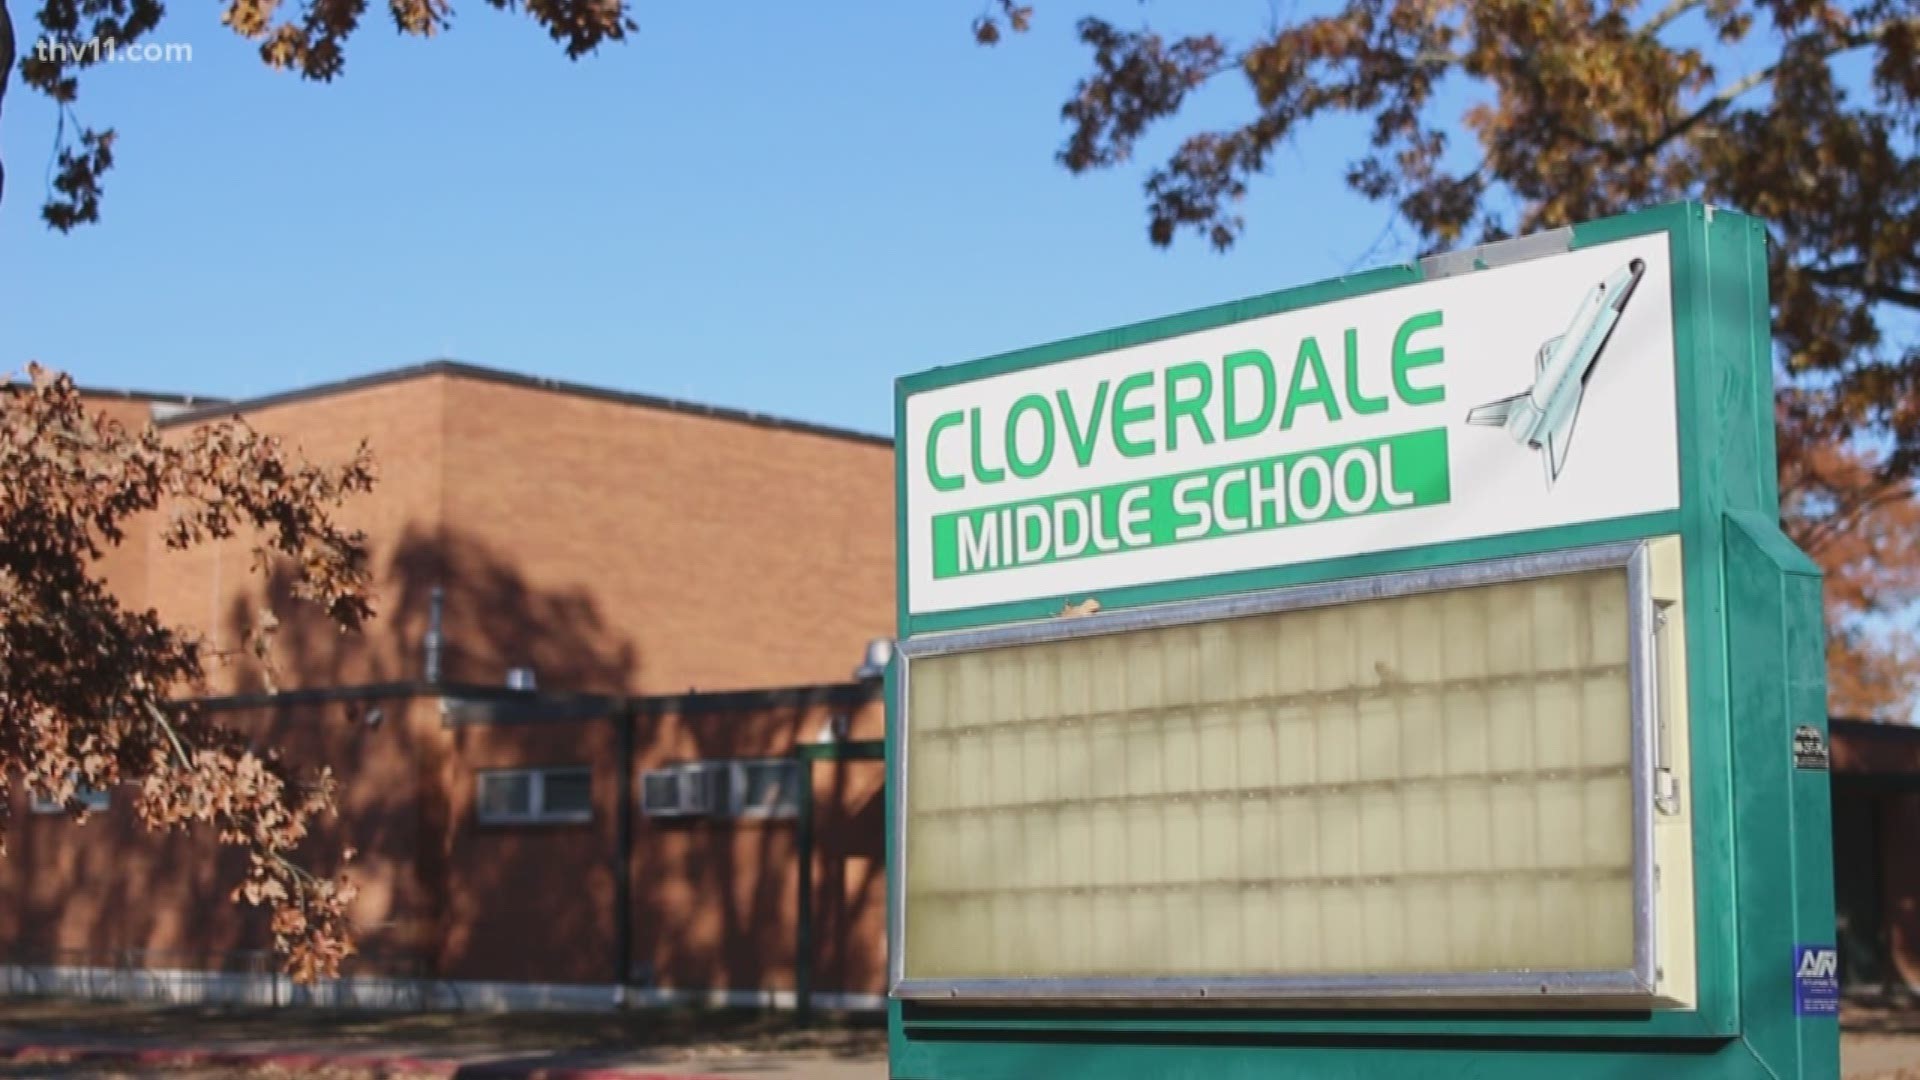 According to the Little Rock Police Department, detectives are investigating an aide at Cloverdale Middle School for allegedly assaulting a 12-year-old boy.